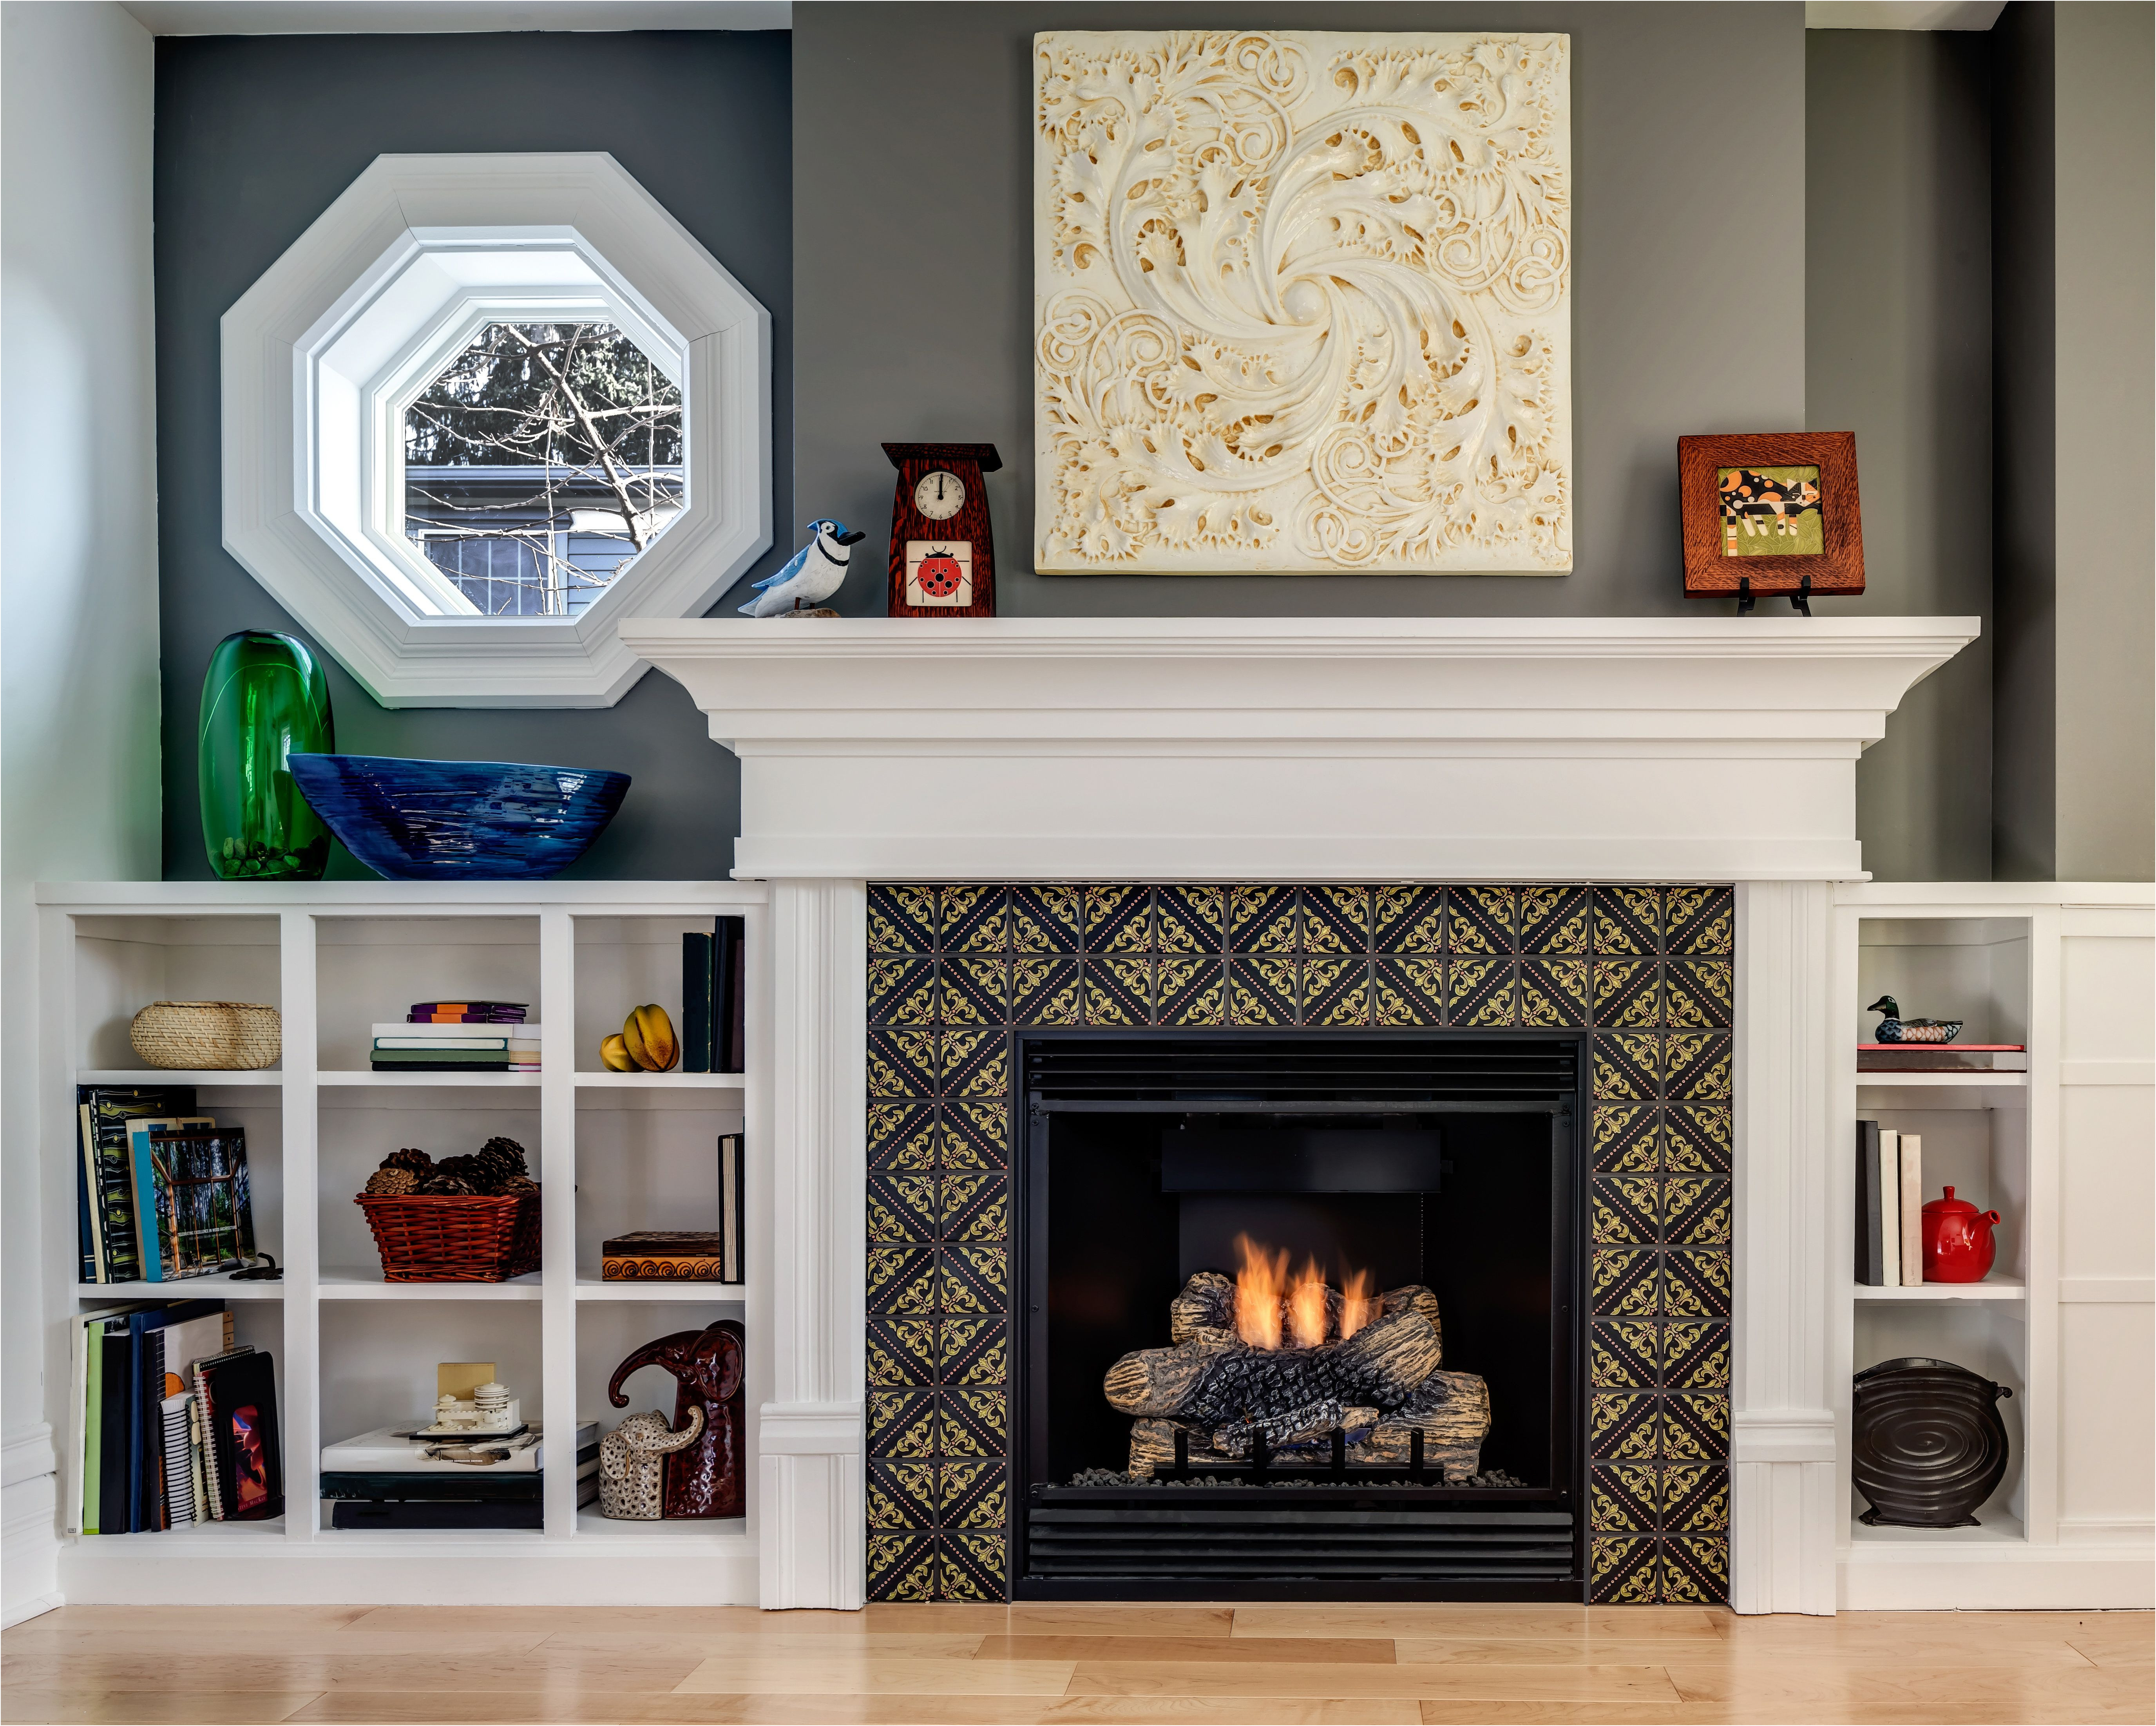 Tiled Fireplace Designs Lovely This Small but Stylish Fireplace Features Our Lisbon Tile